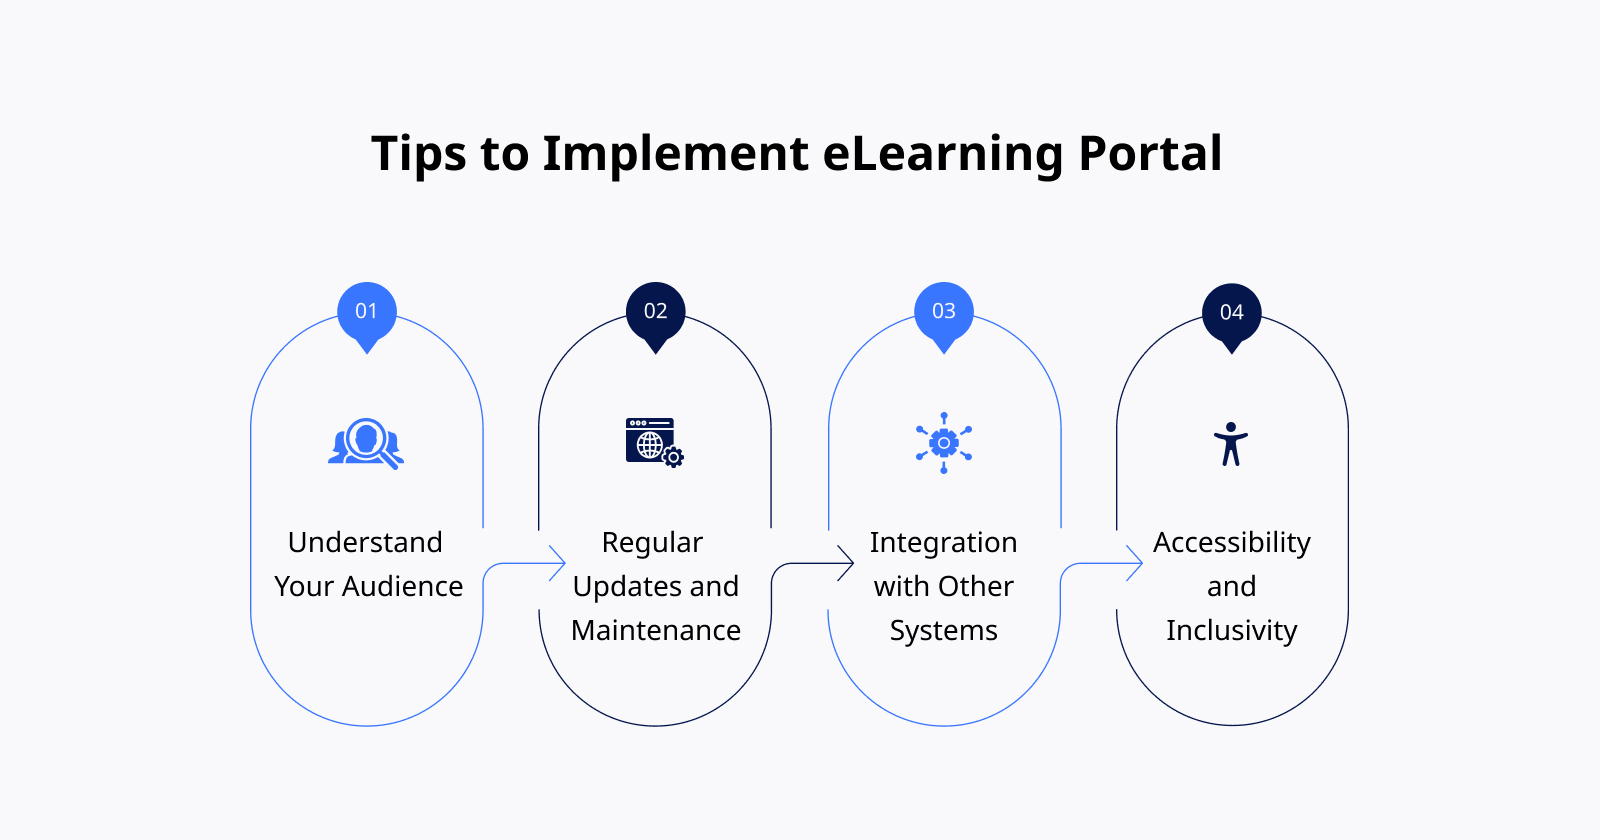 Tips to Implement eLearning Portal